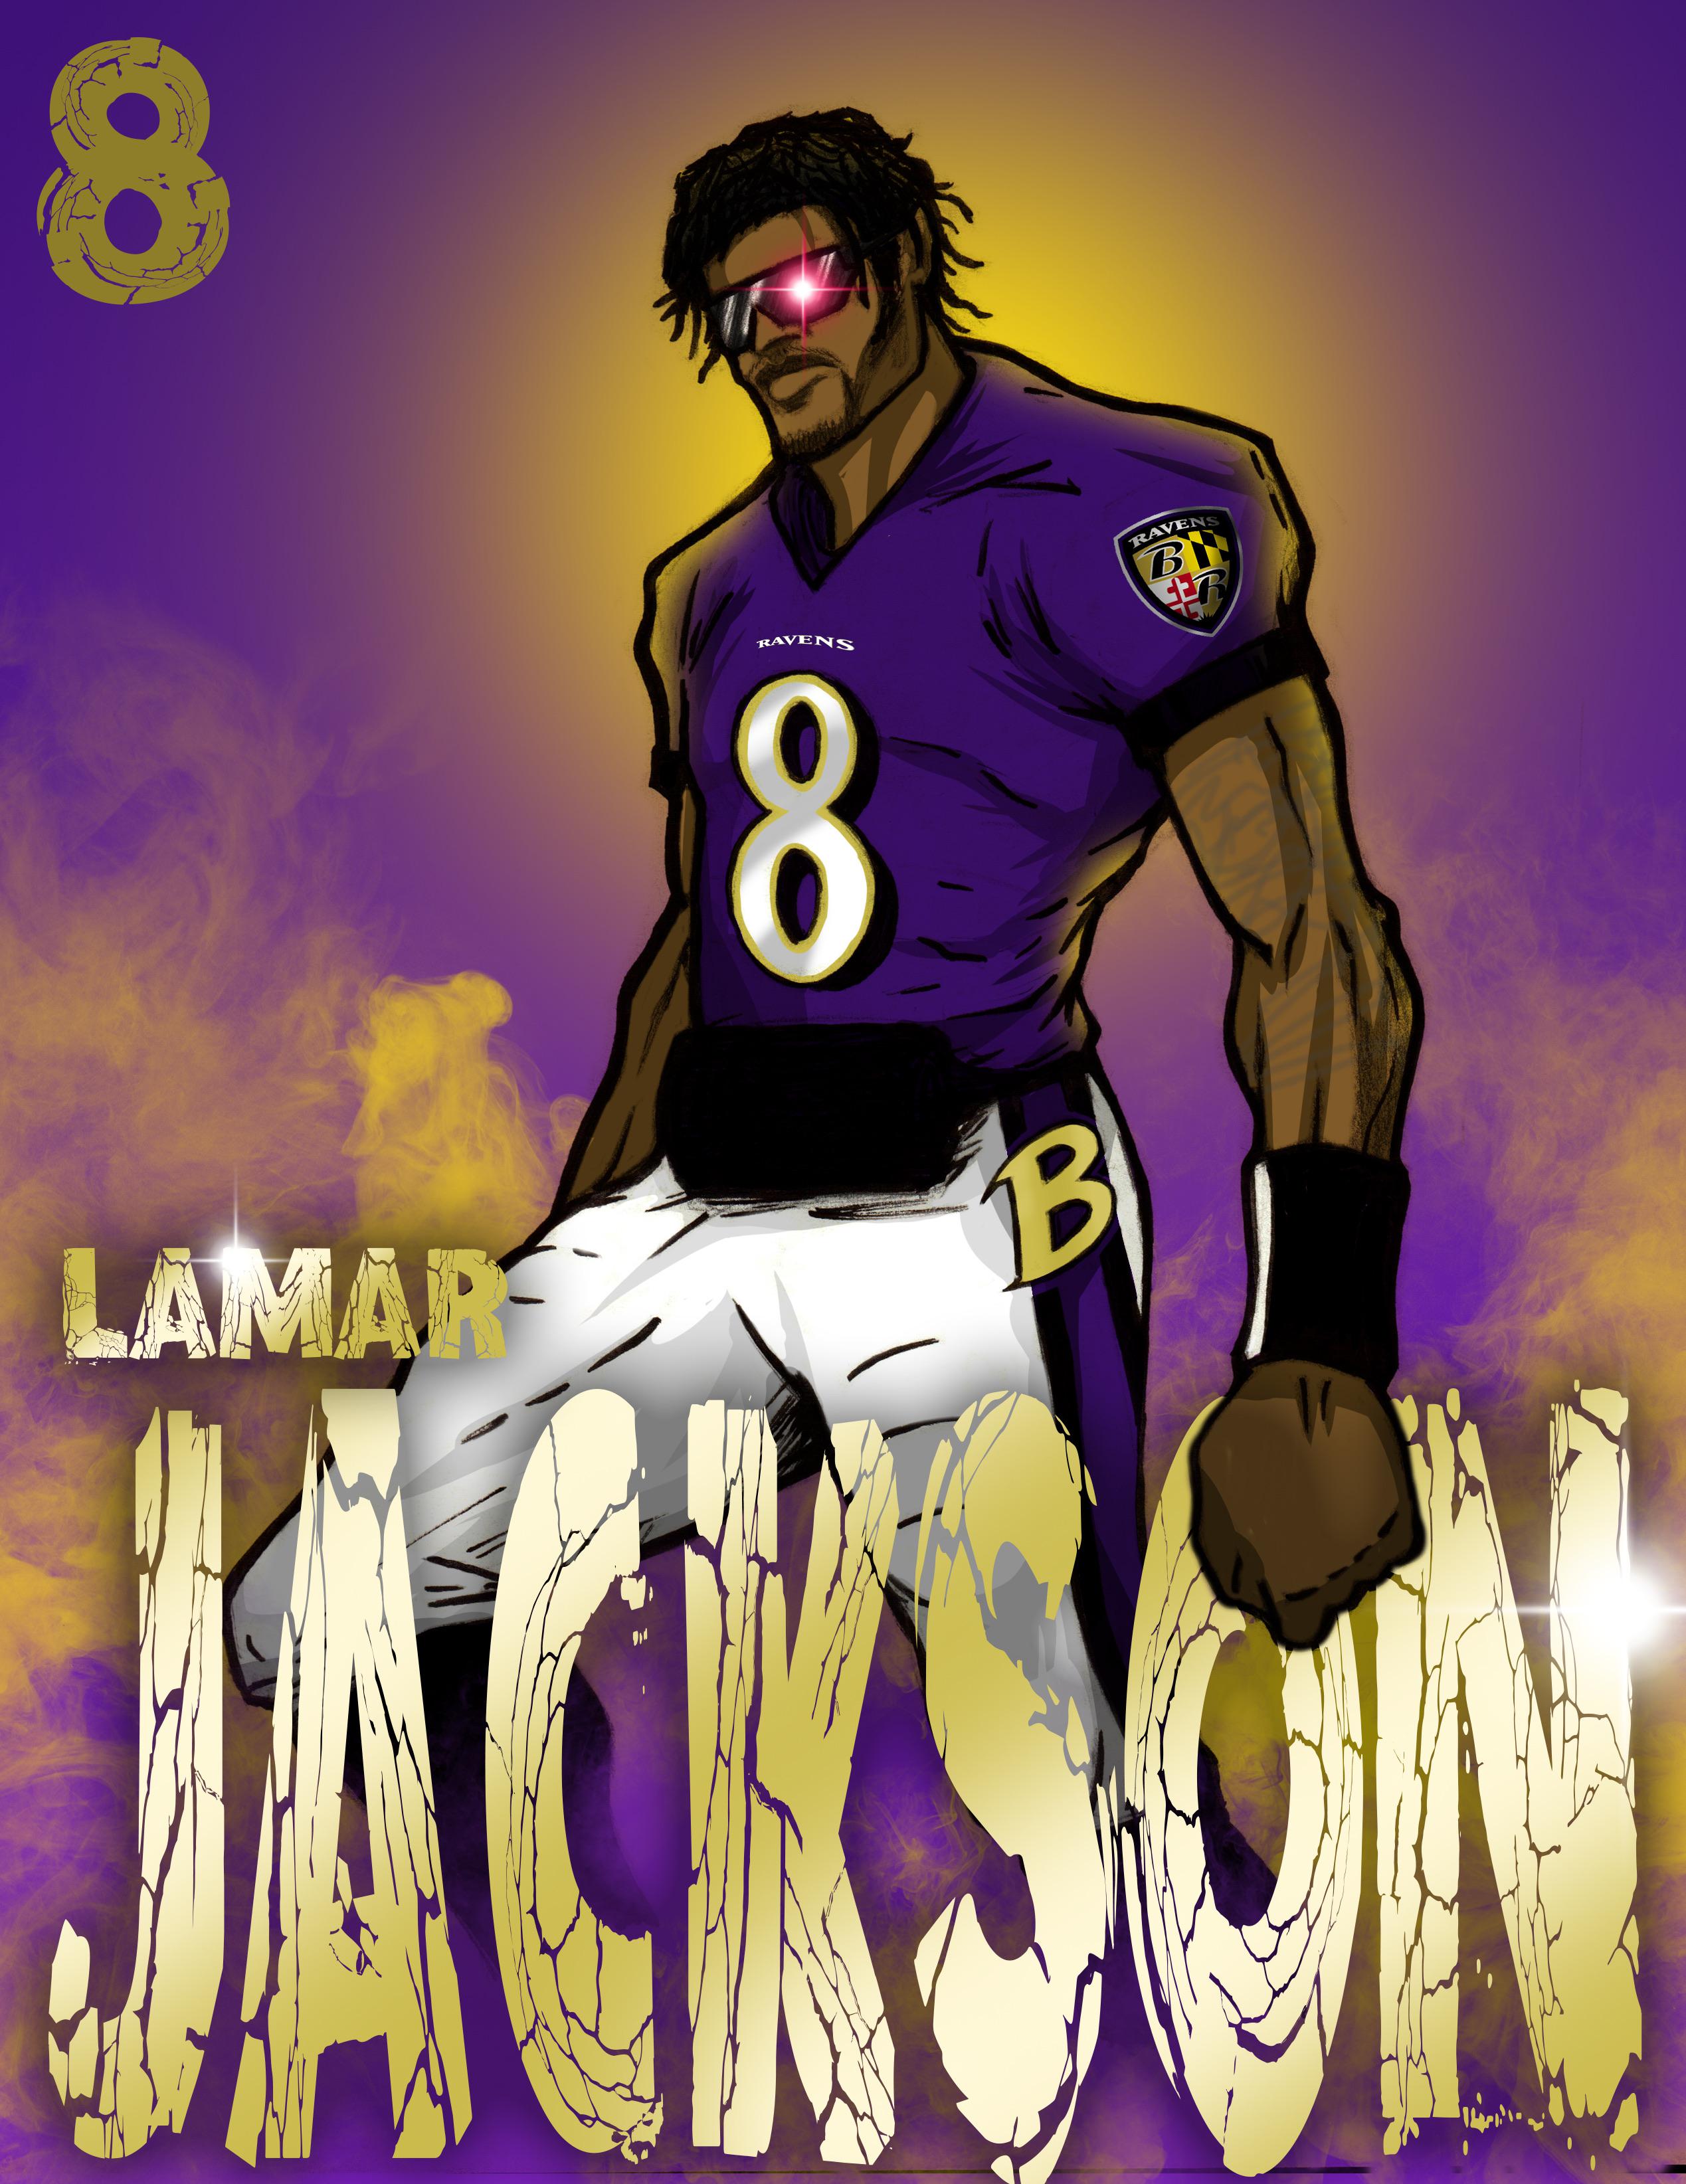 KC Based Comic Book Artist Teacher Here. I Made This Poster Of Lamar Jackson. What Do You Guys Think?